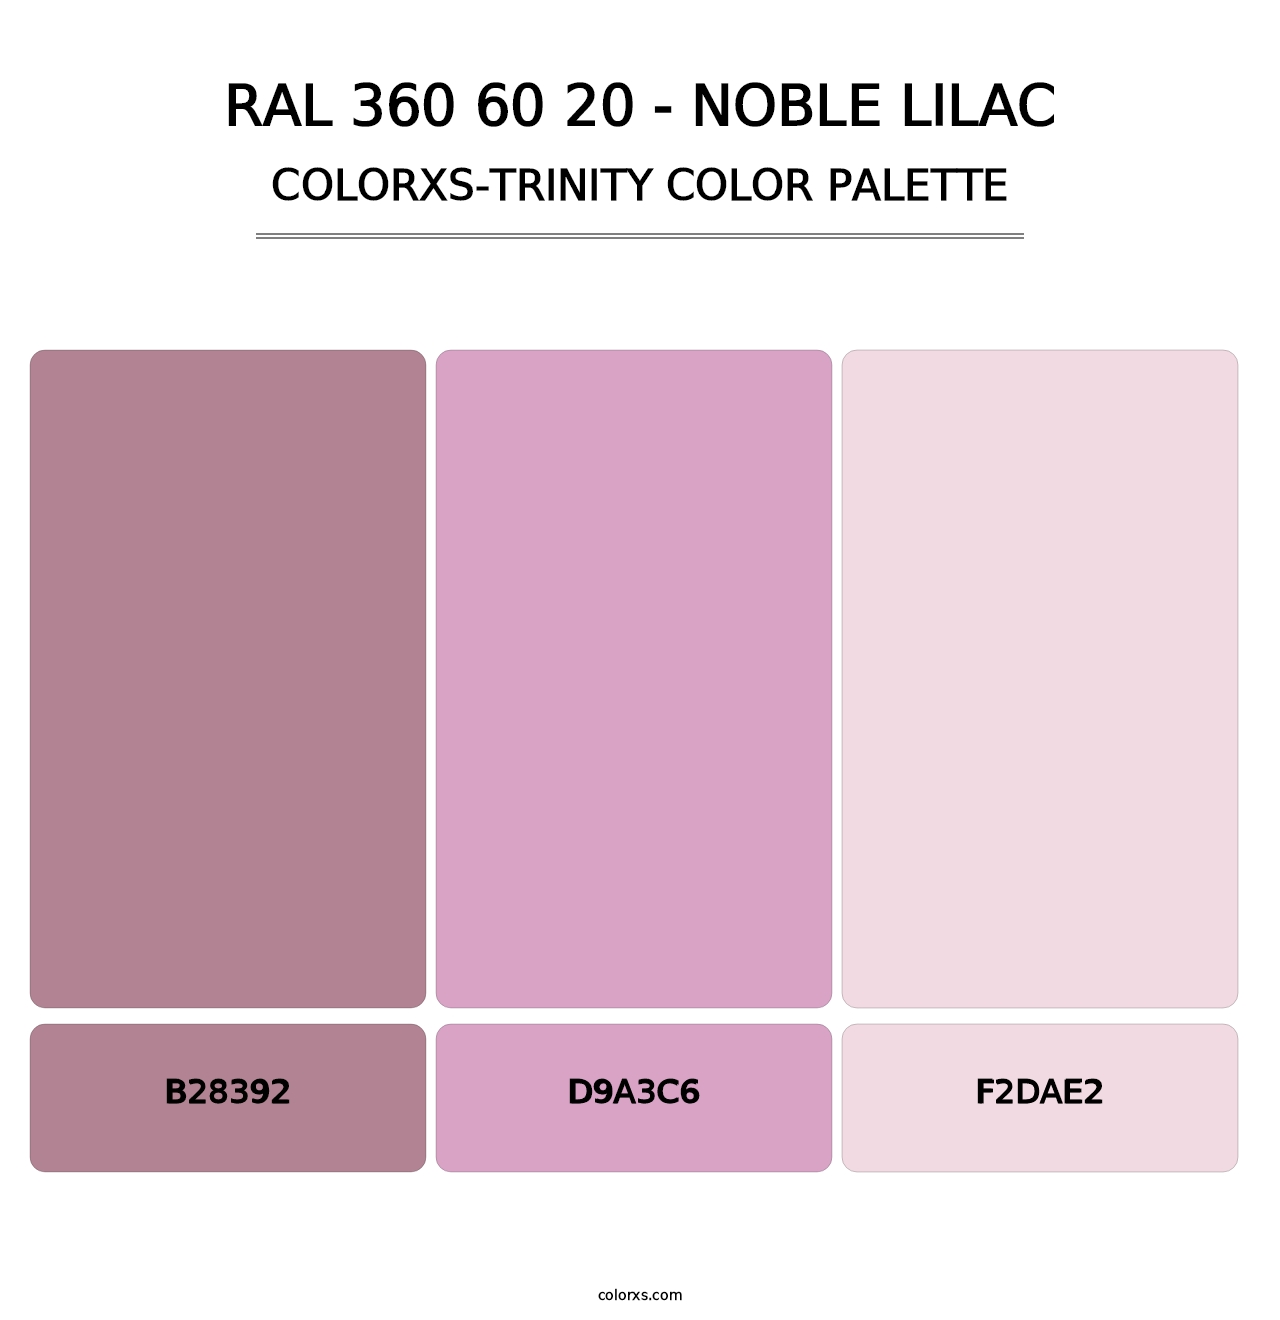 RAL 360 60 20 - Noble Lilac - Colorxs Trinity Palette